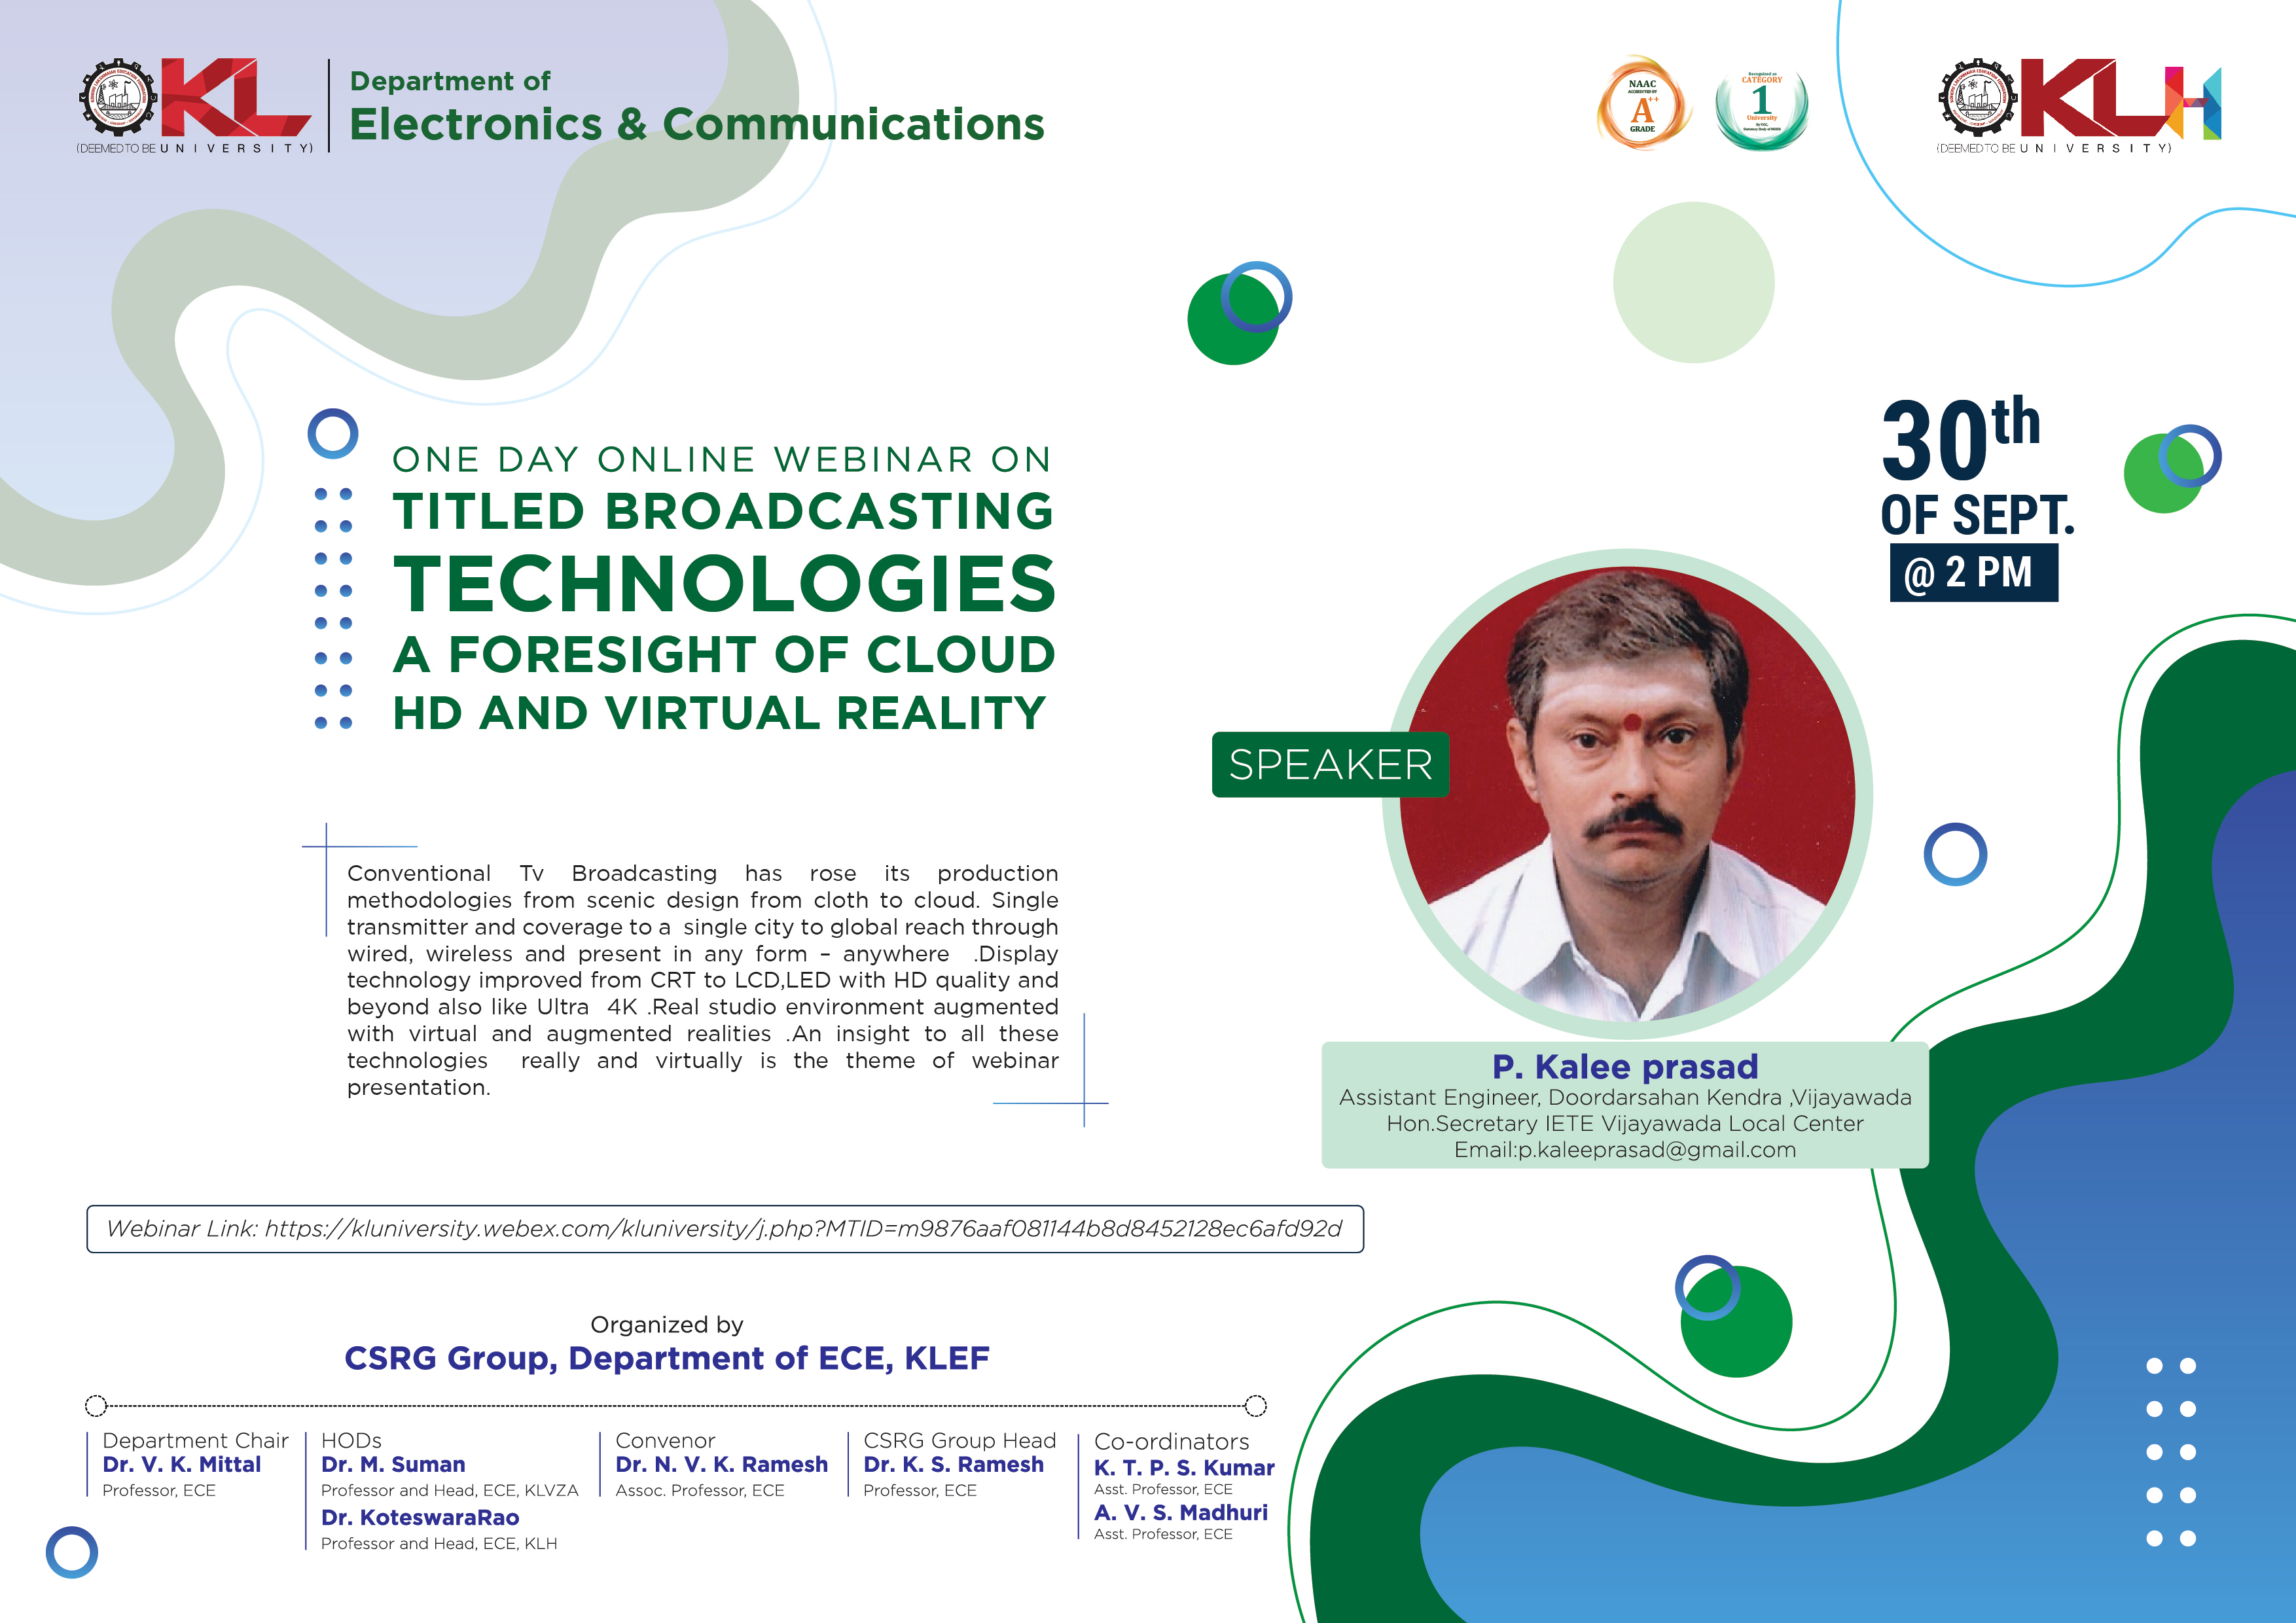 Webinar (17) on Broadcasting technologies – A foresight of cloud, HD and virtual reality.